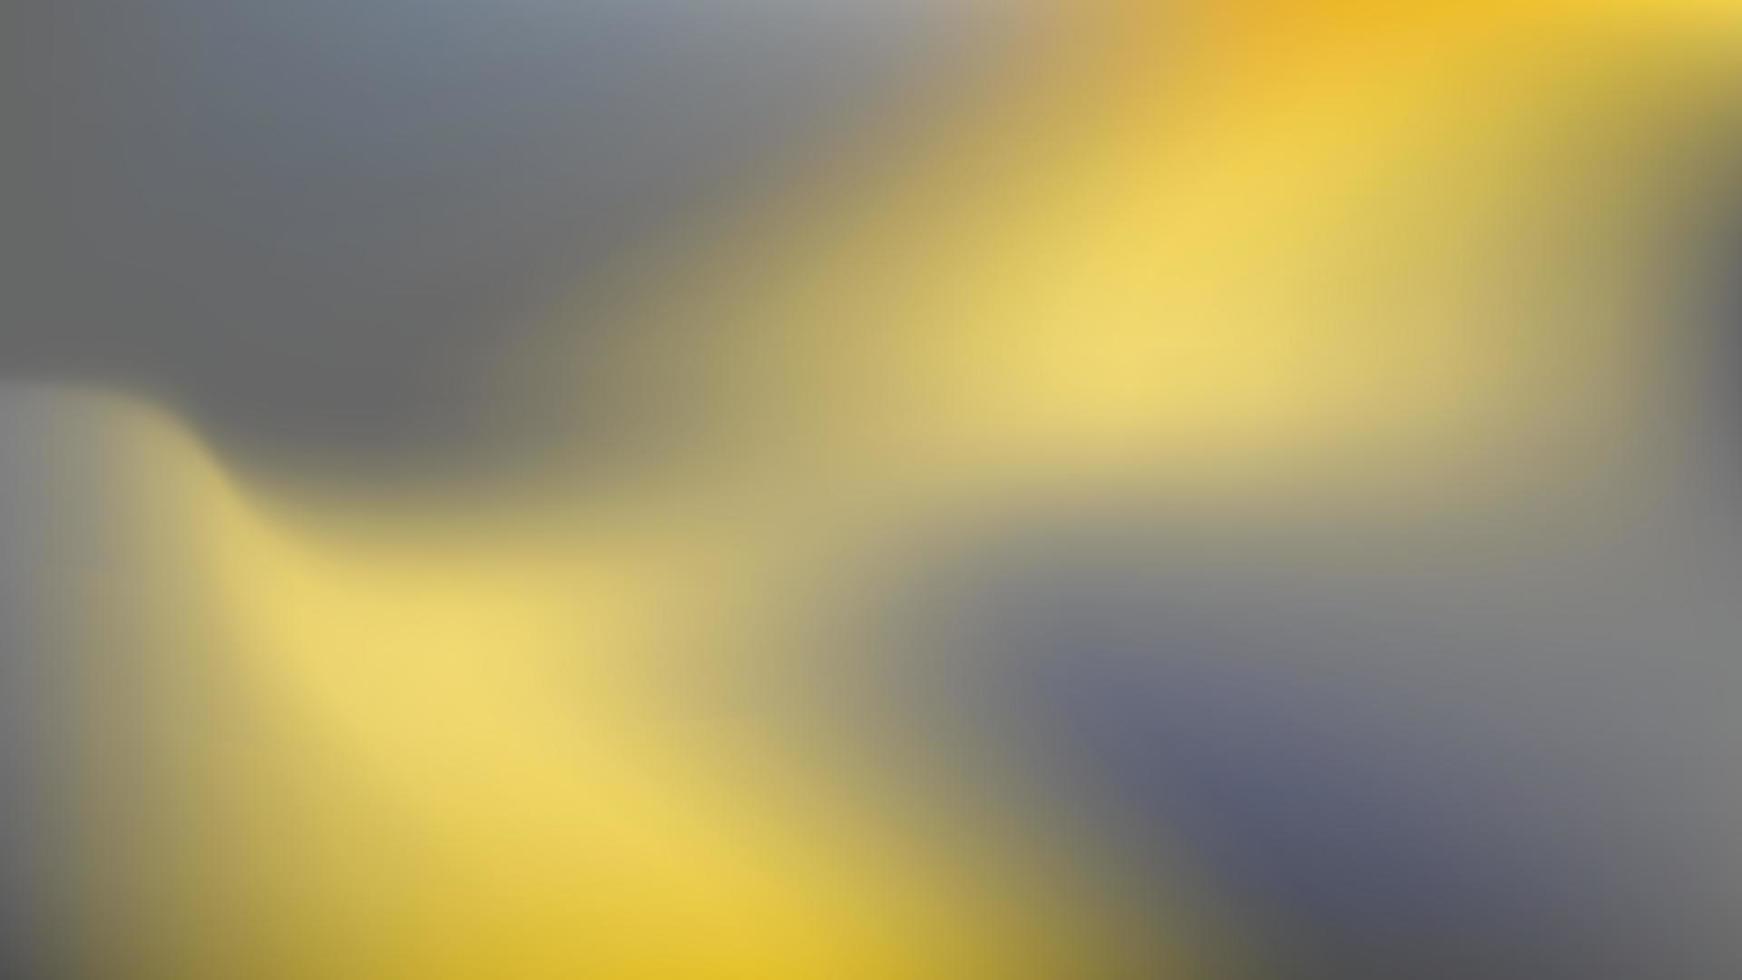 Abstract yellow and grey gradeint light background vector